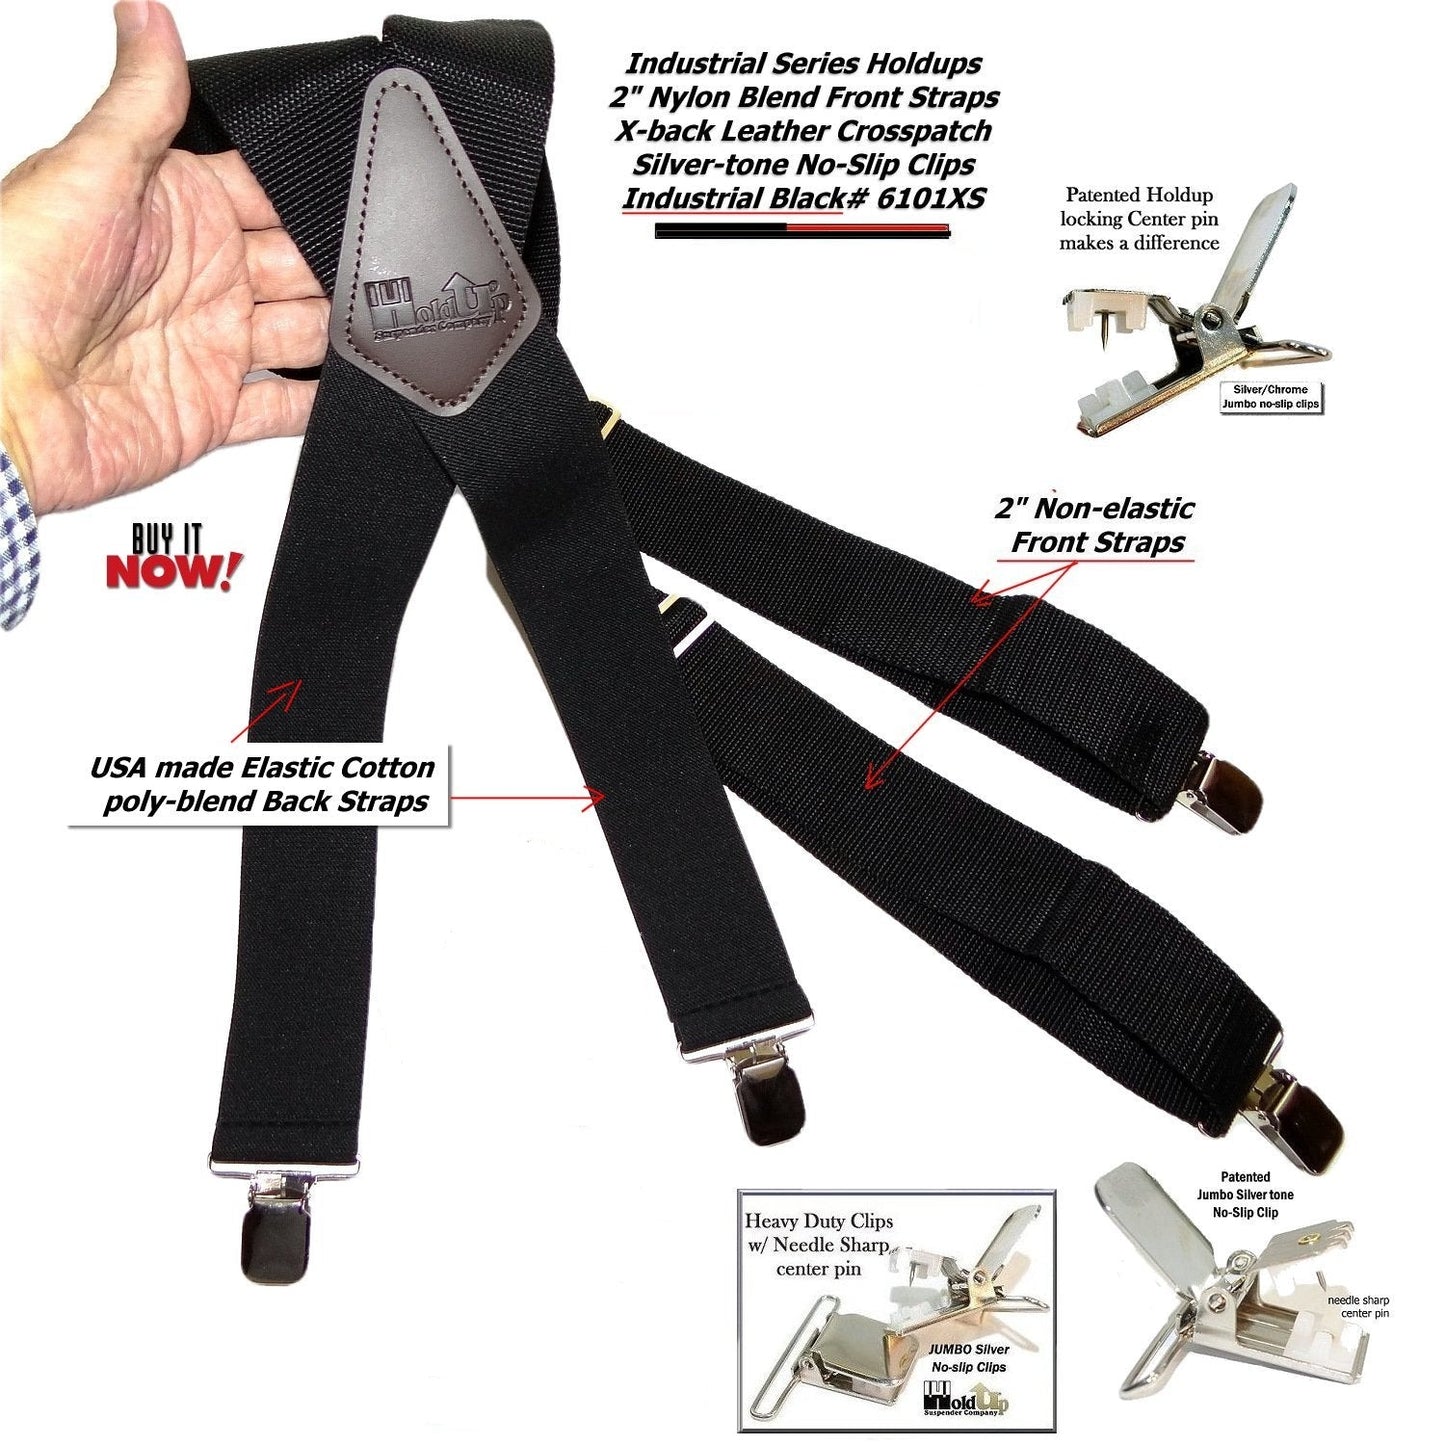 Hold'Em Suspenders for Men Heavy Duty Utility Clips 2 Wide - Black 